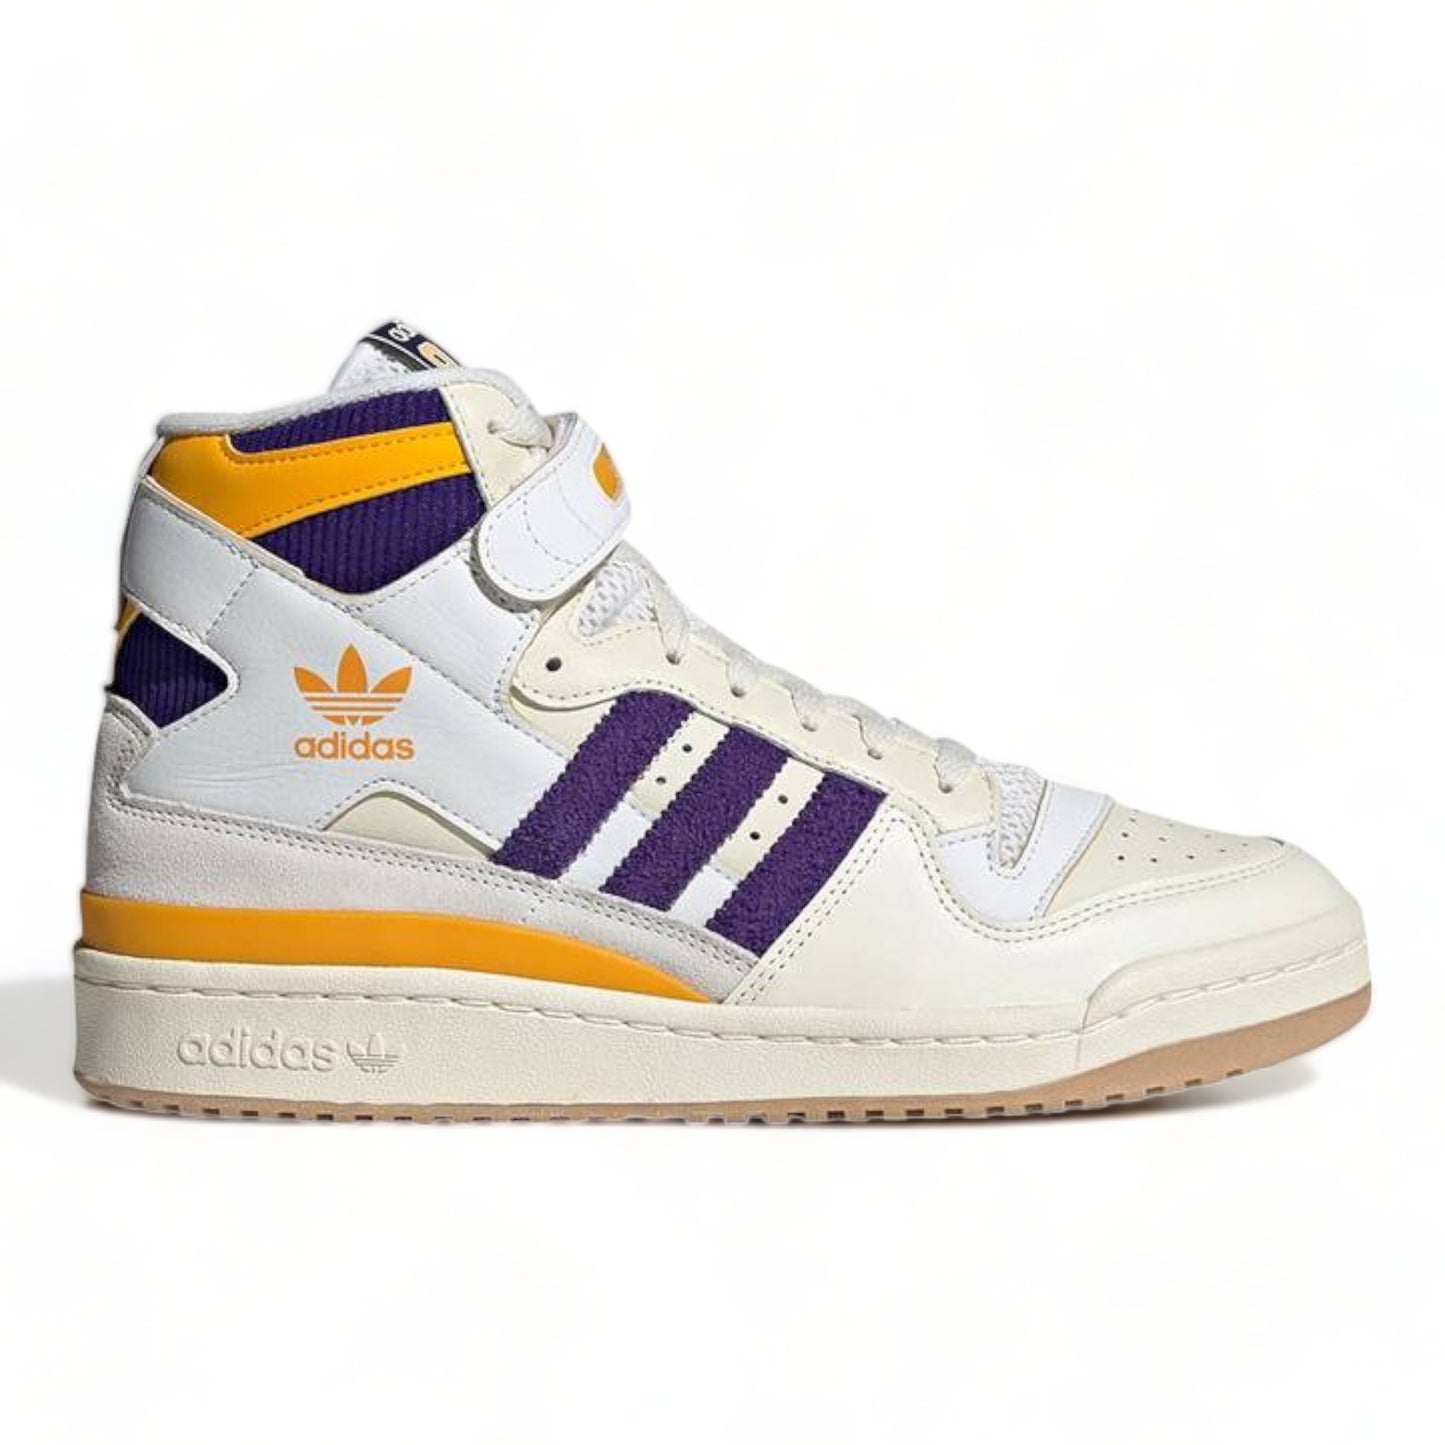 ADIDAS FORUM 84 HIGH 'LAKERS'